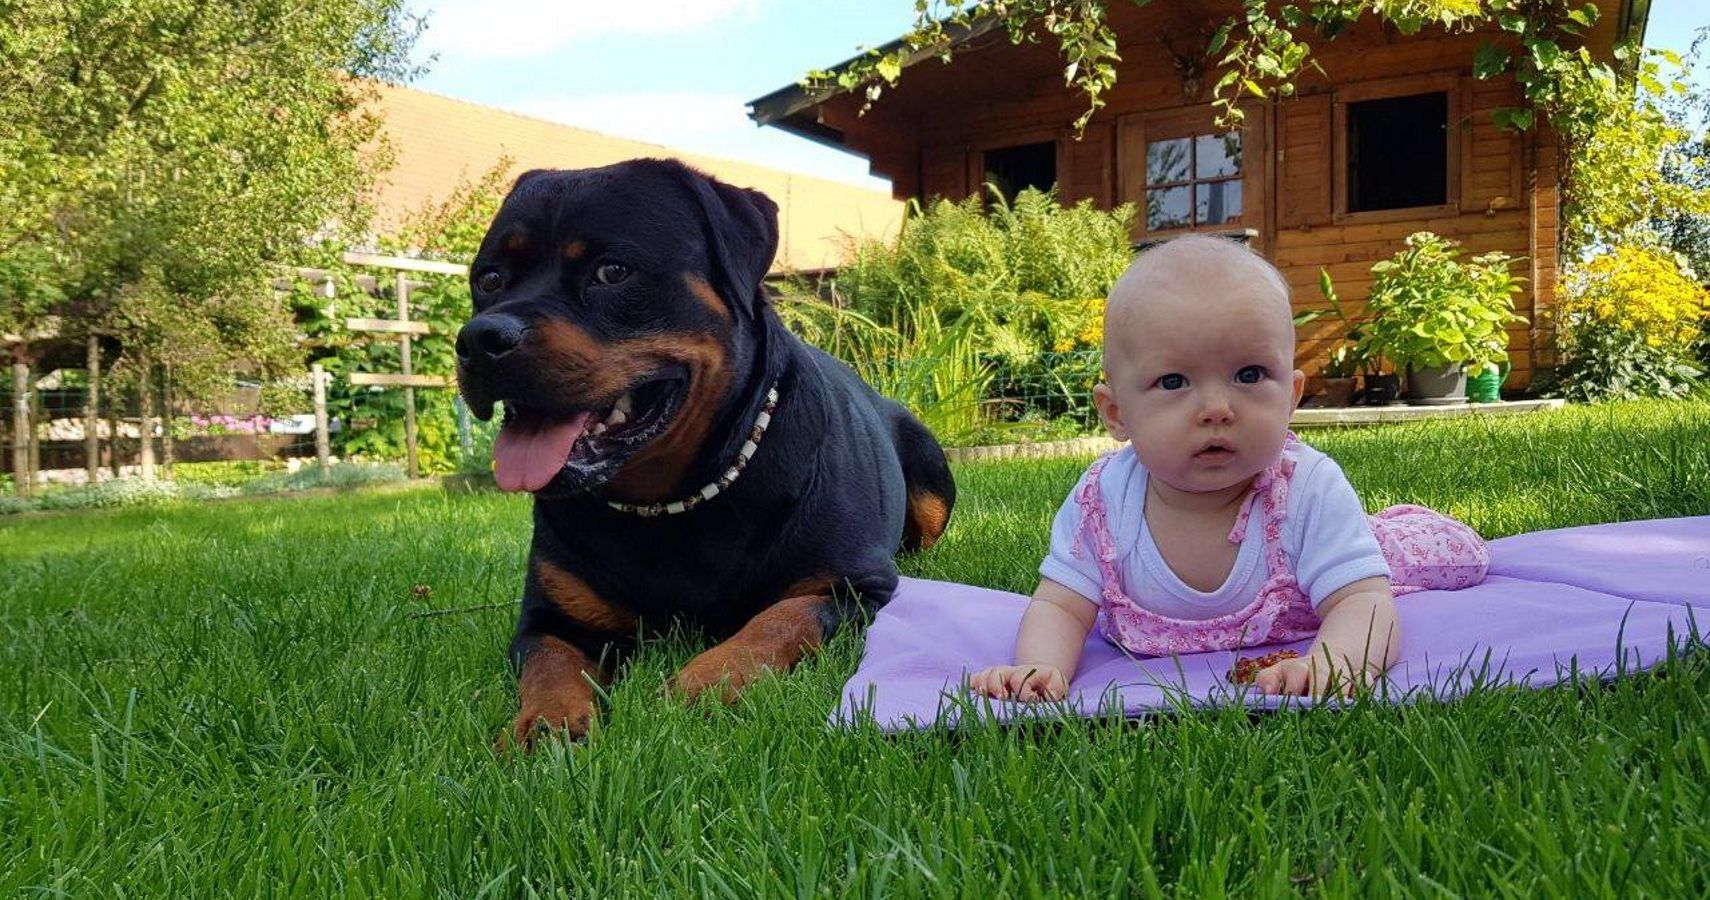 Massive Rottweiler Shows Soft Side Singing Nursery Rhymes With Tiny Human